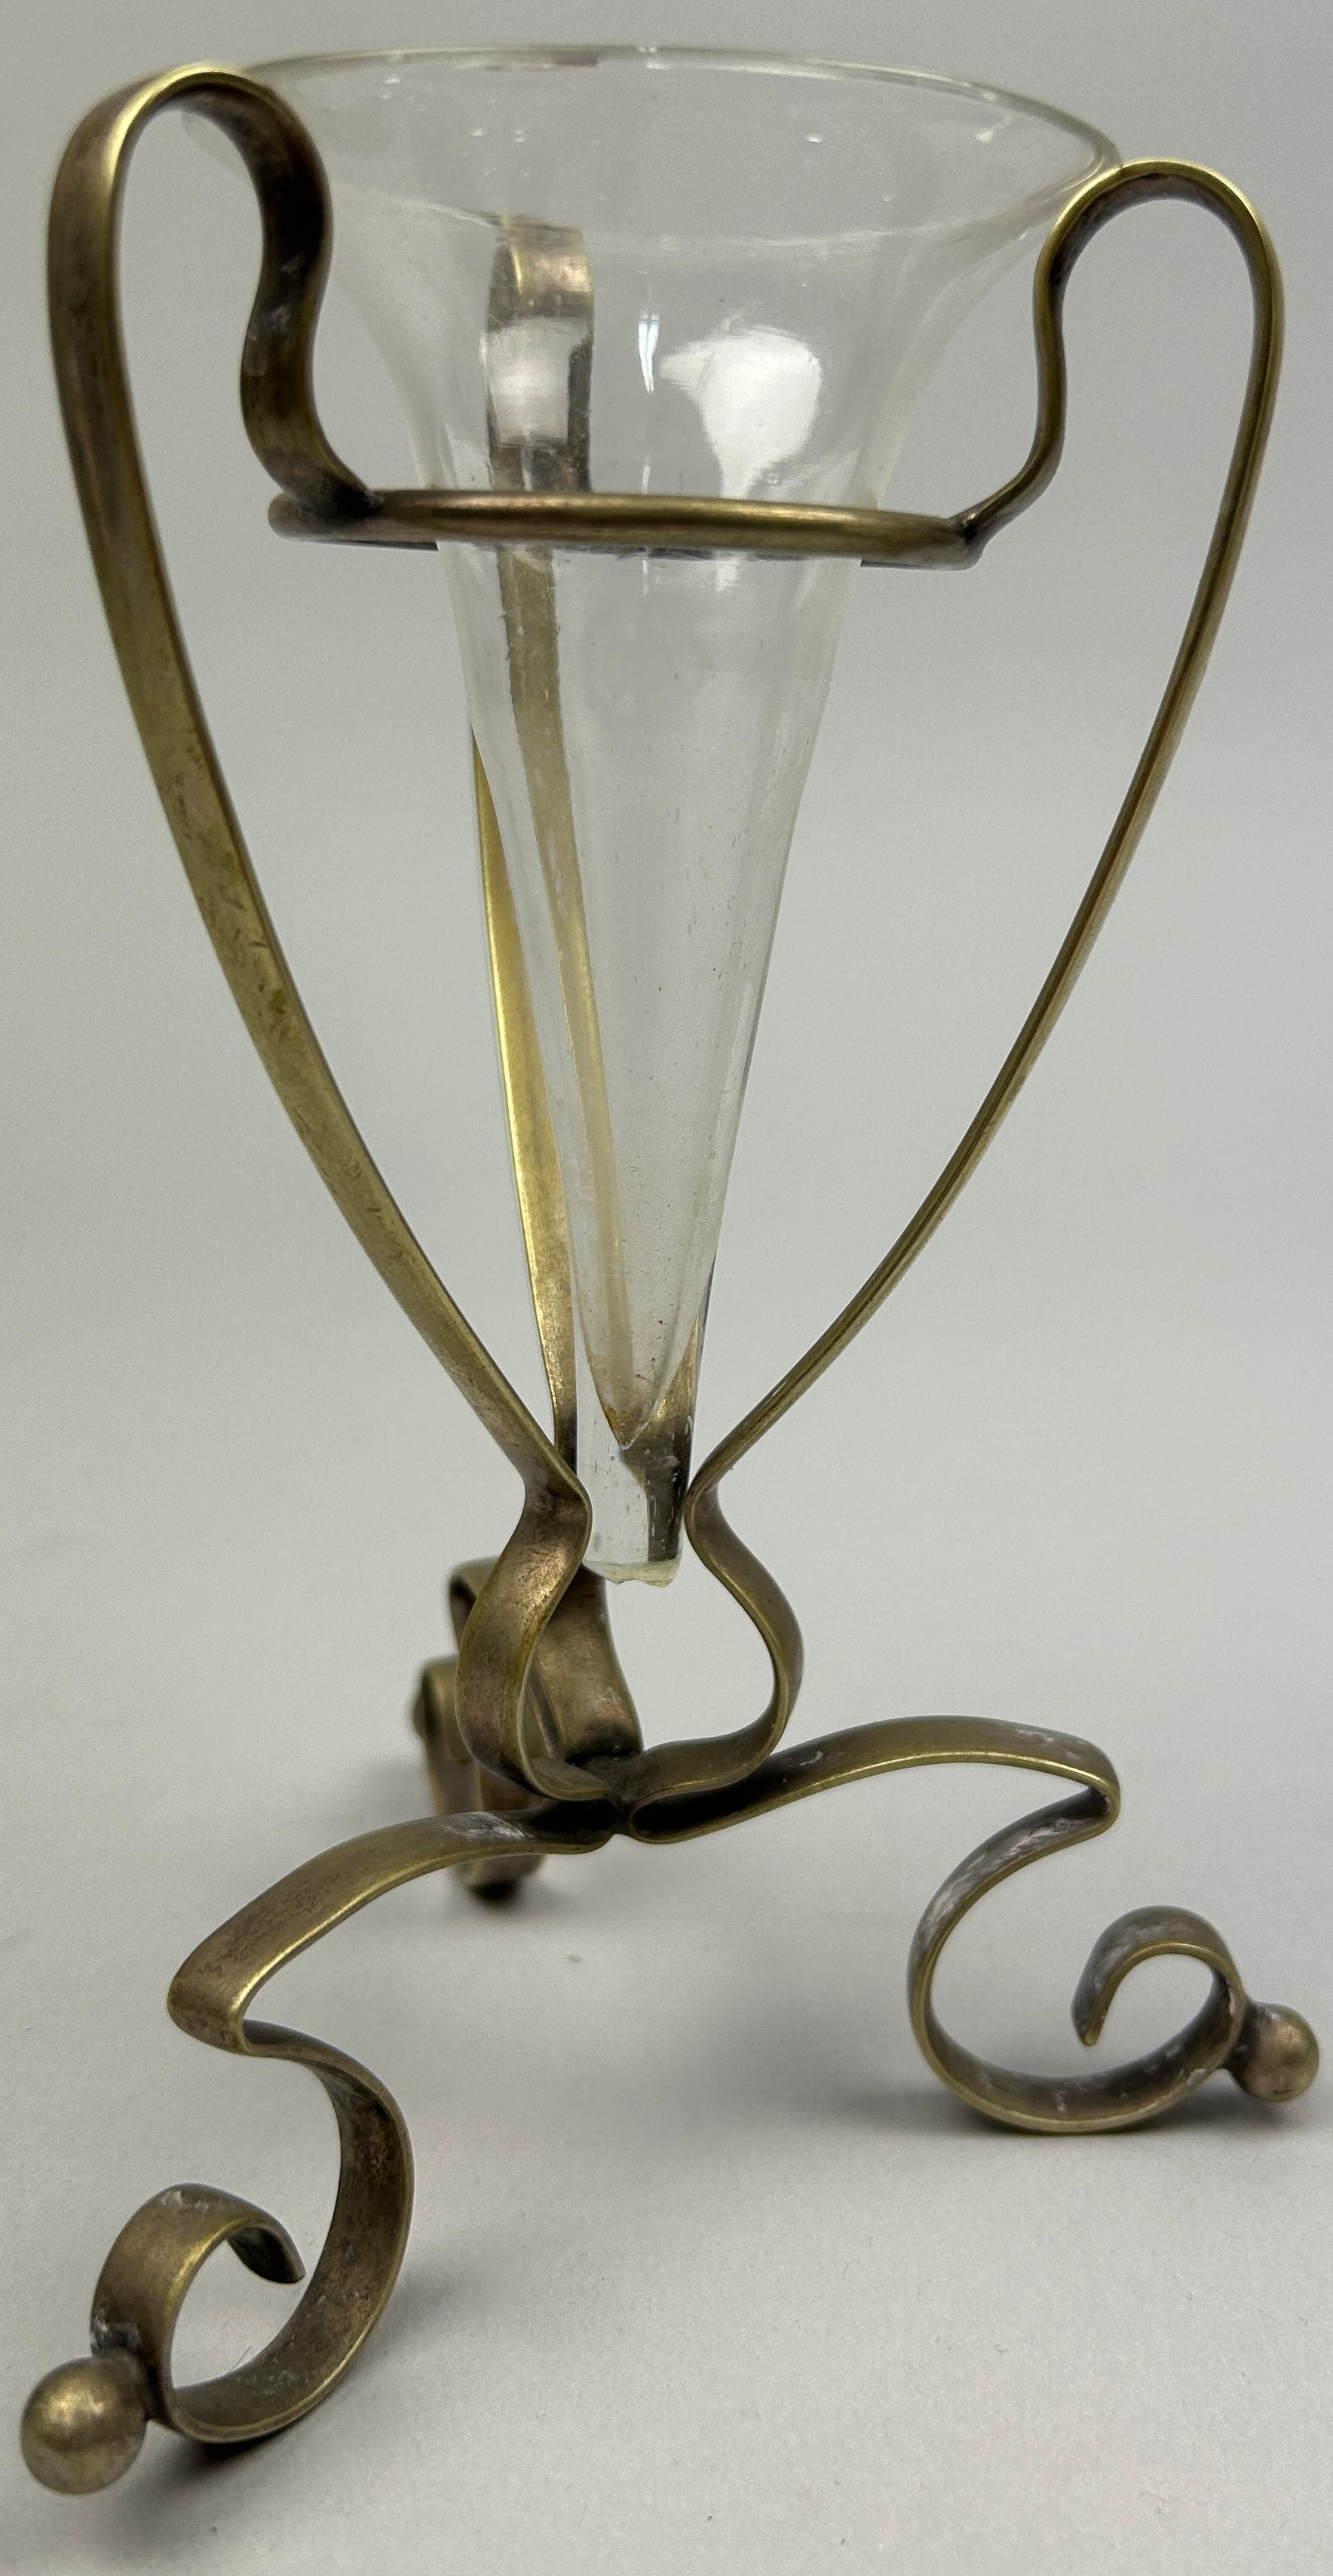 ATTRIBUTED TO WILLIAM ARTHUR SMITH BENSON (1854-1924), conical glasses in art nouveau brass stands - Image 3 of 3